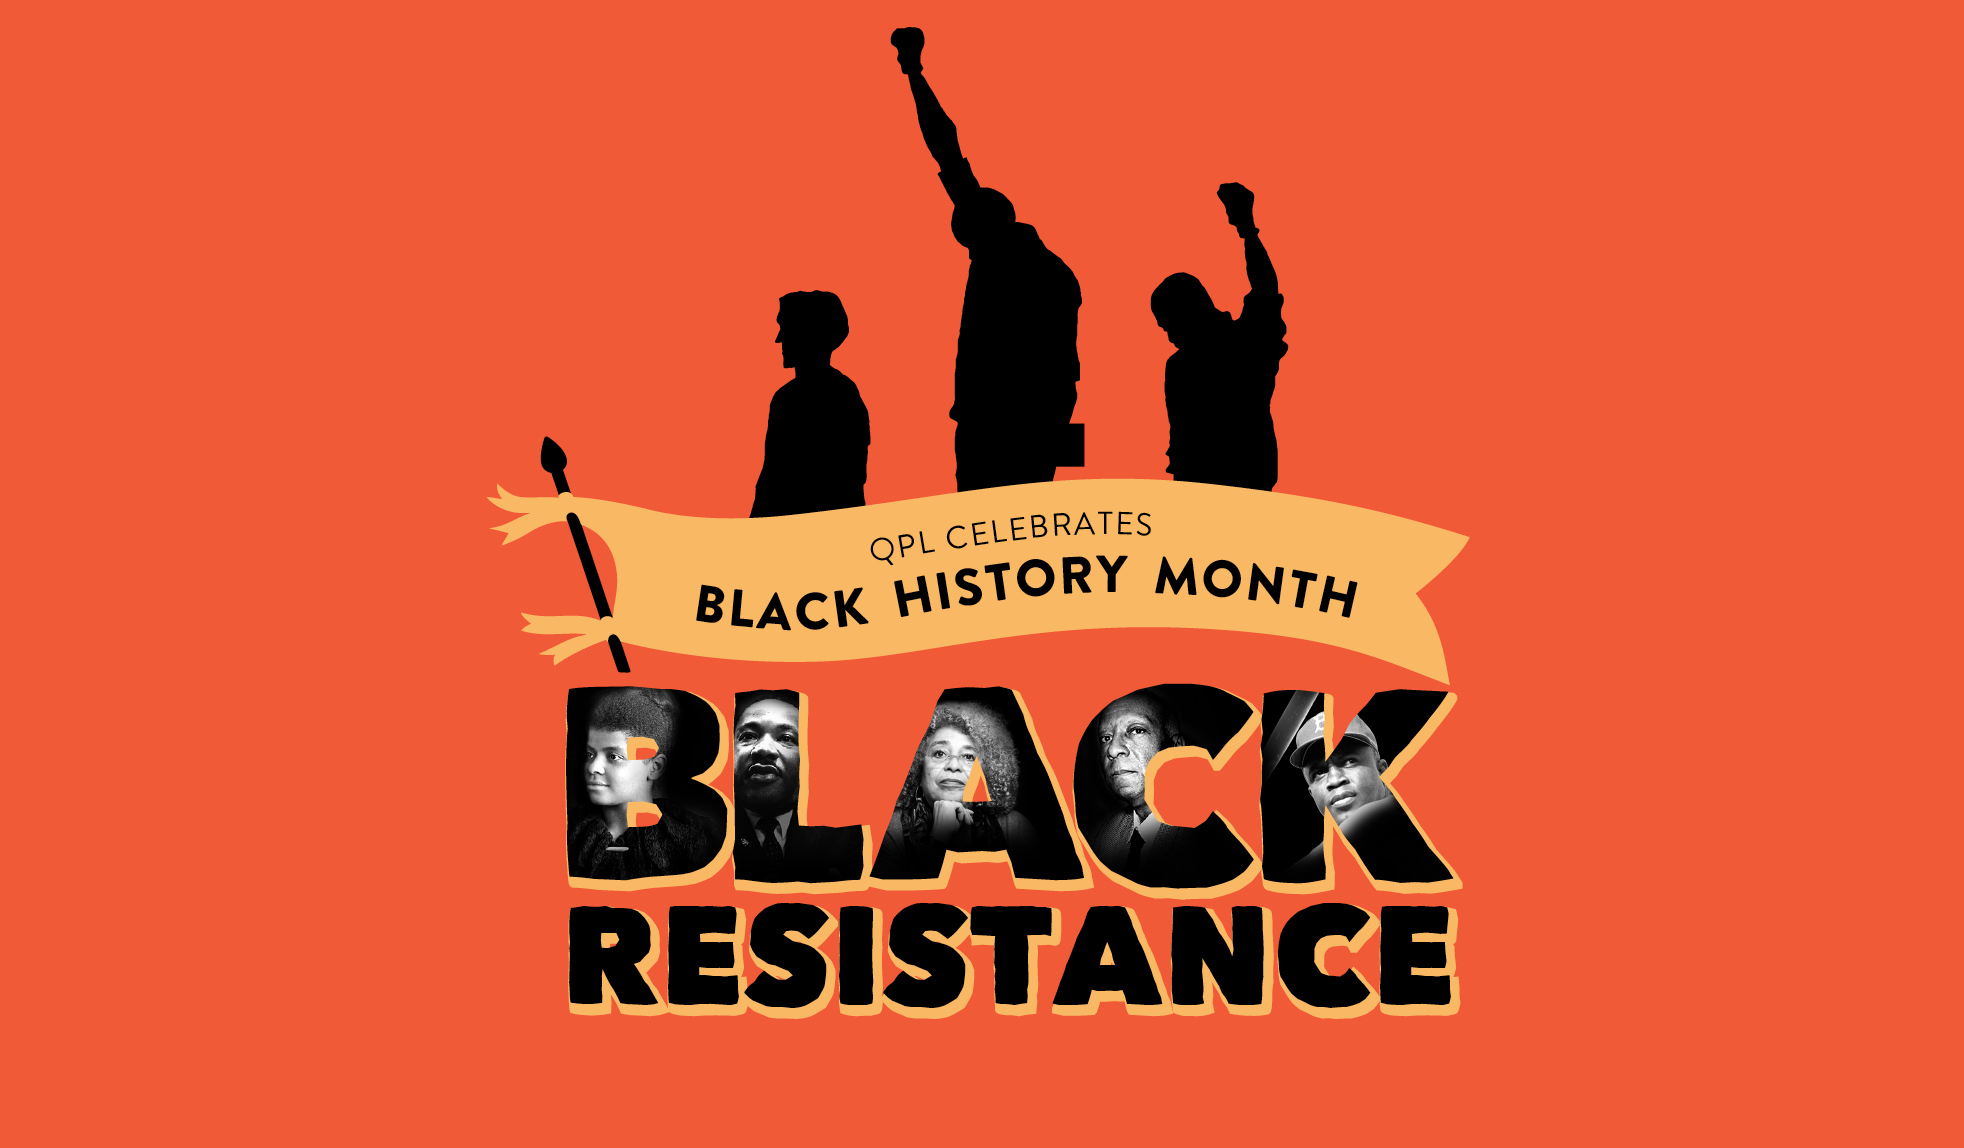 This Black History Month, join us in celebrating Black resistance of the past, present, and future.